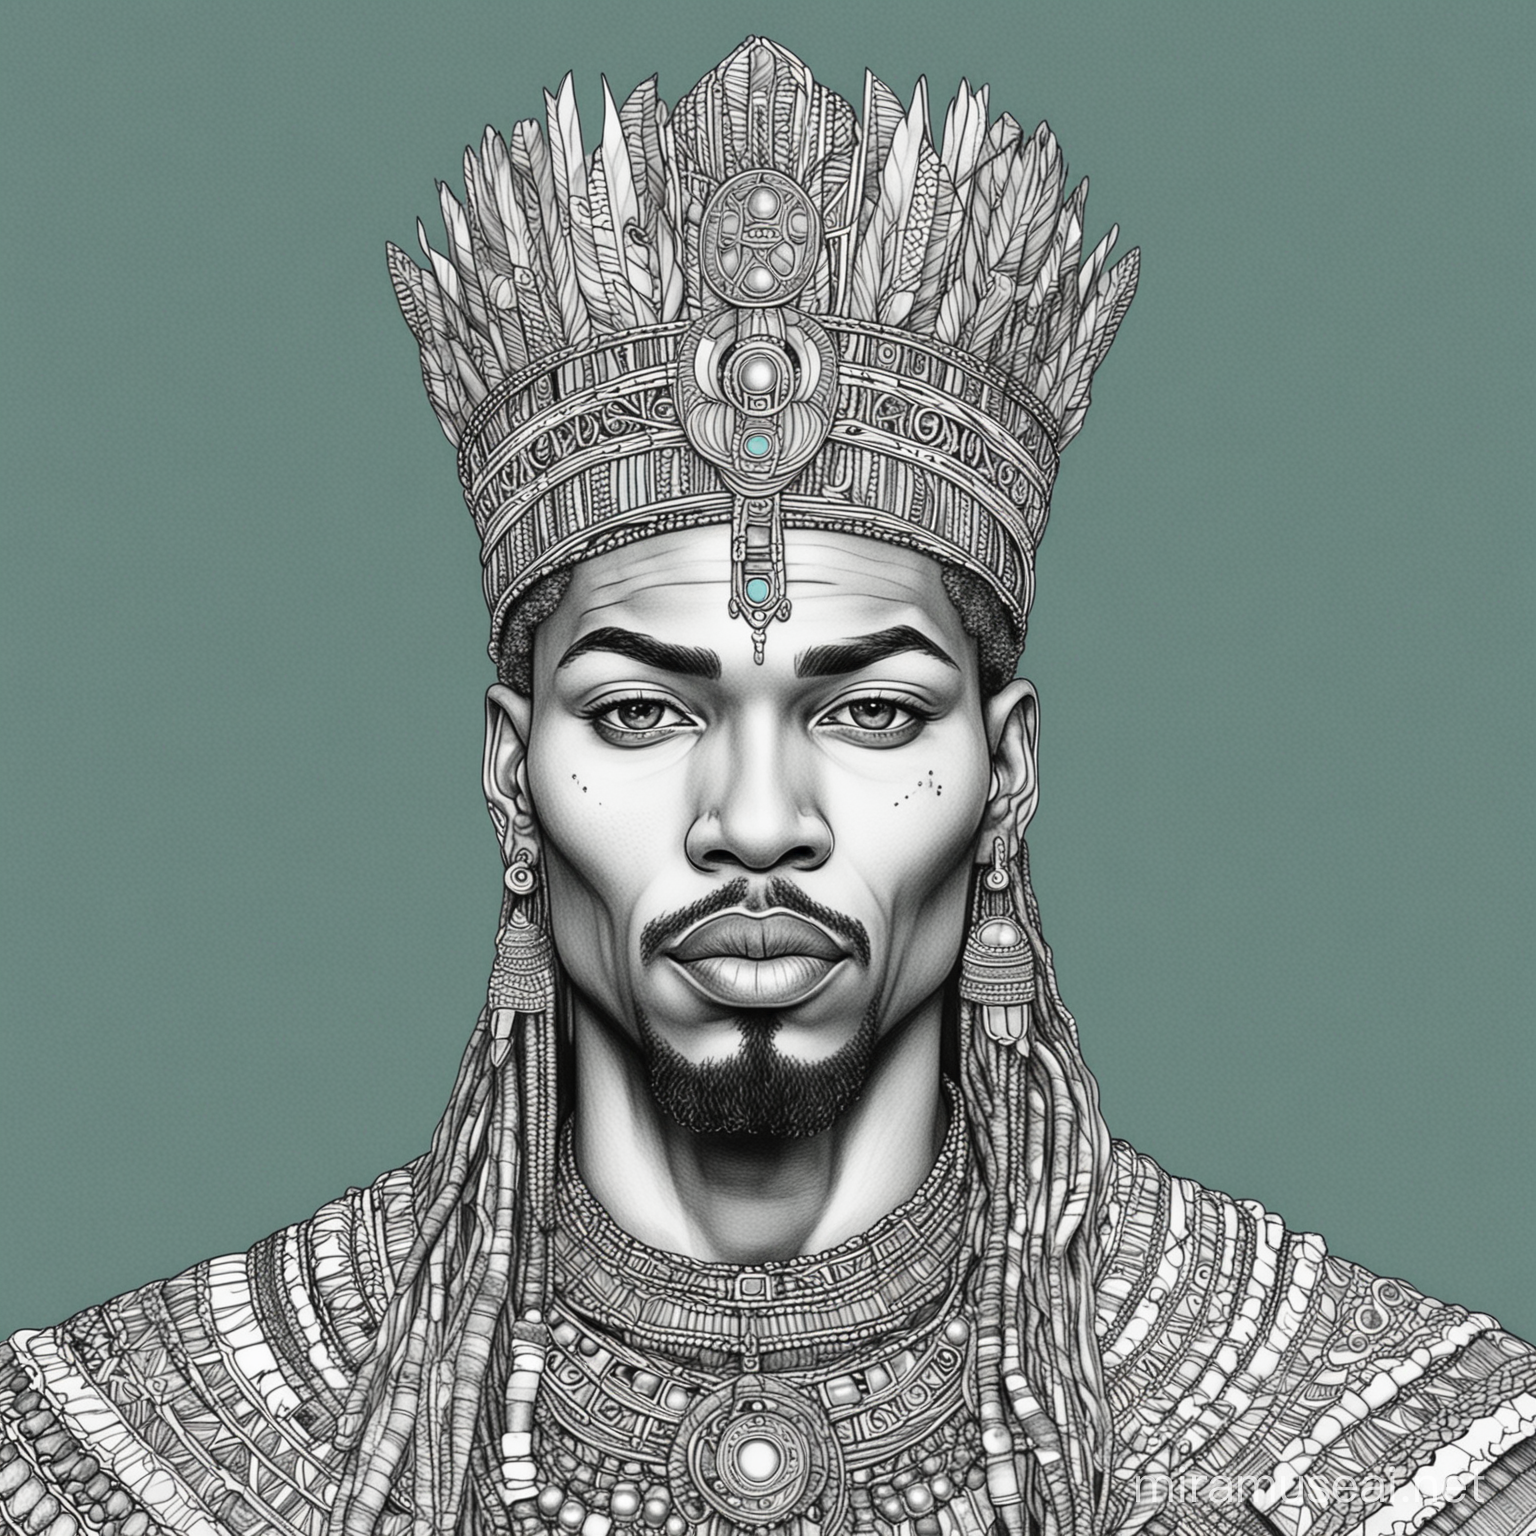 Adult coloring book page. Black and white. Teal background. Single Line Drawing. Thin lines. Powerful Ancient African King. Bold Look. Looking majestic, wellbuilt.